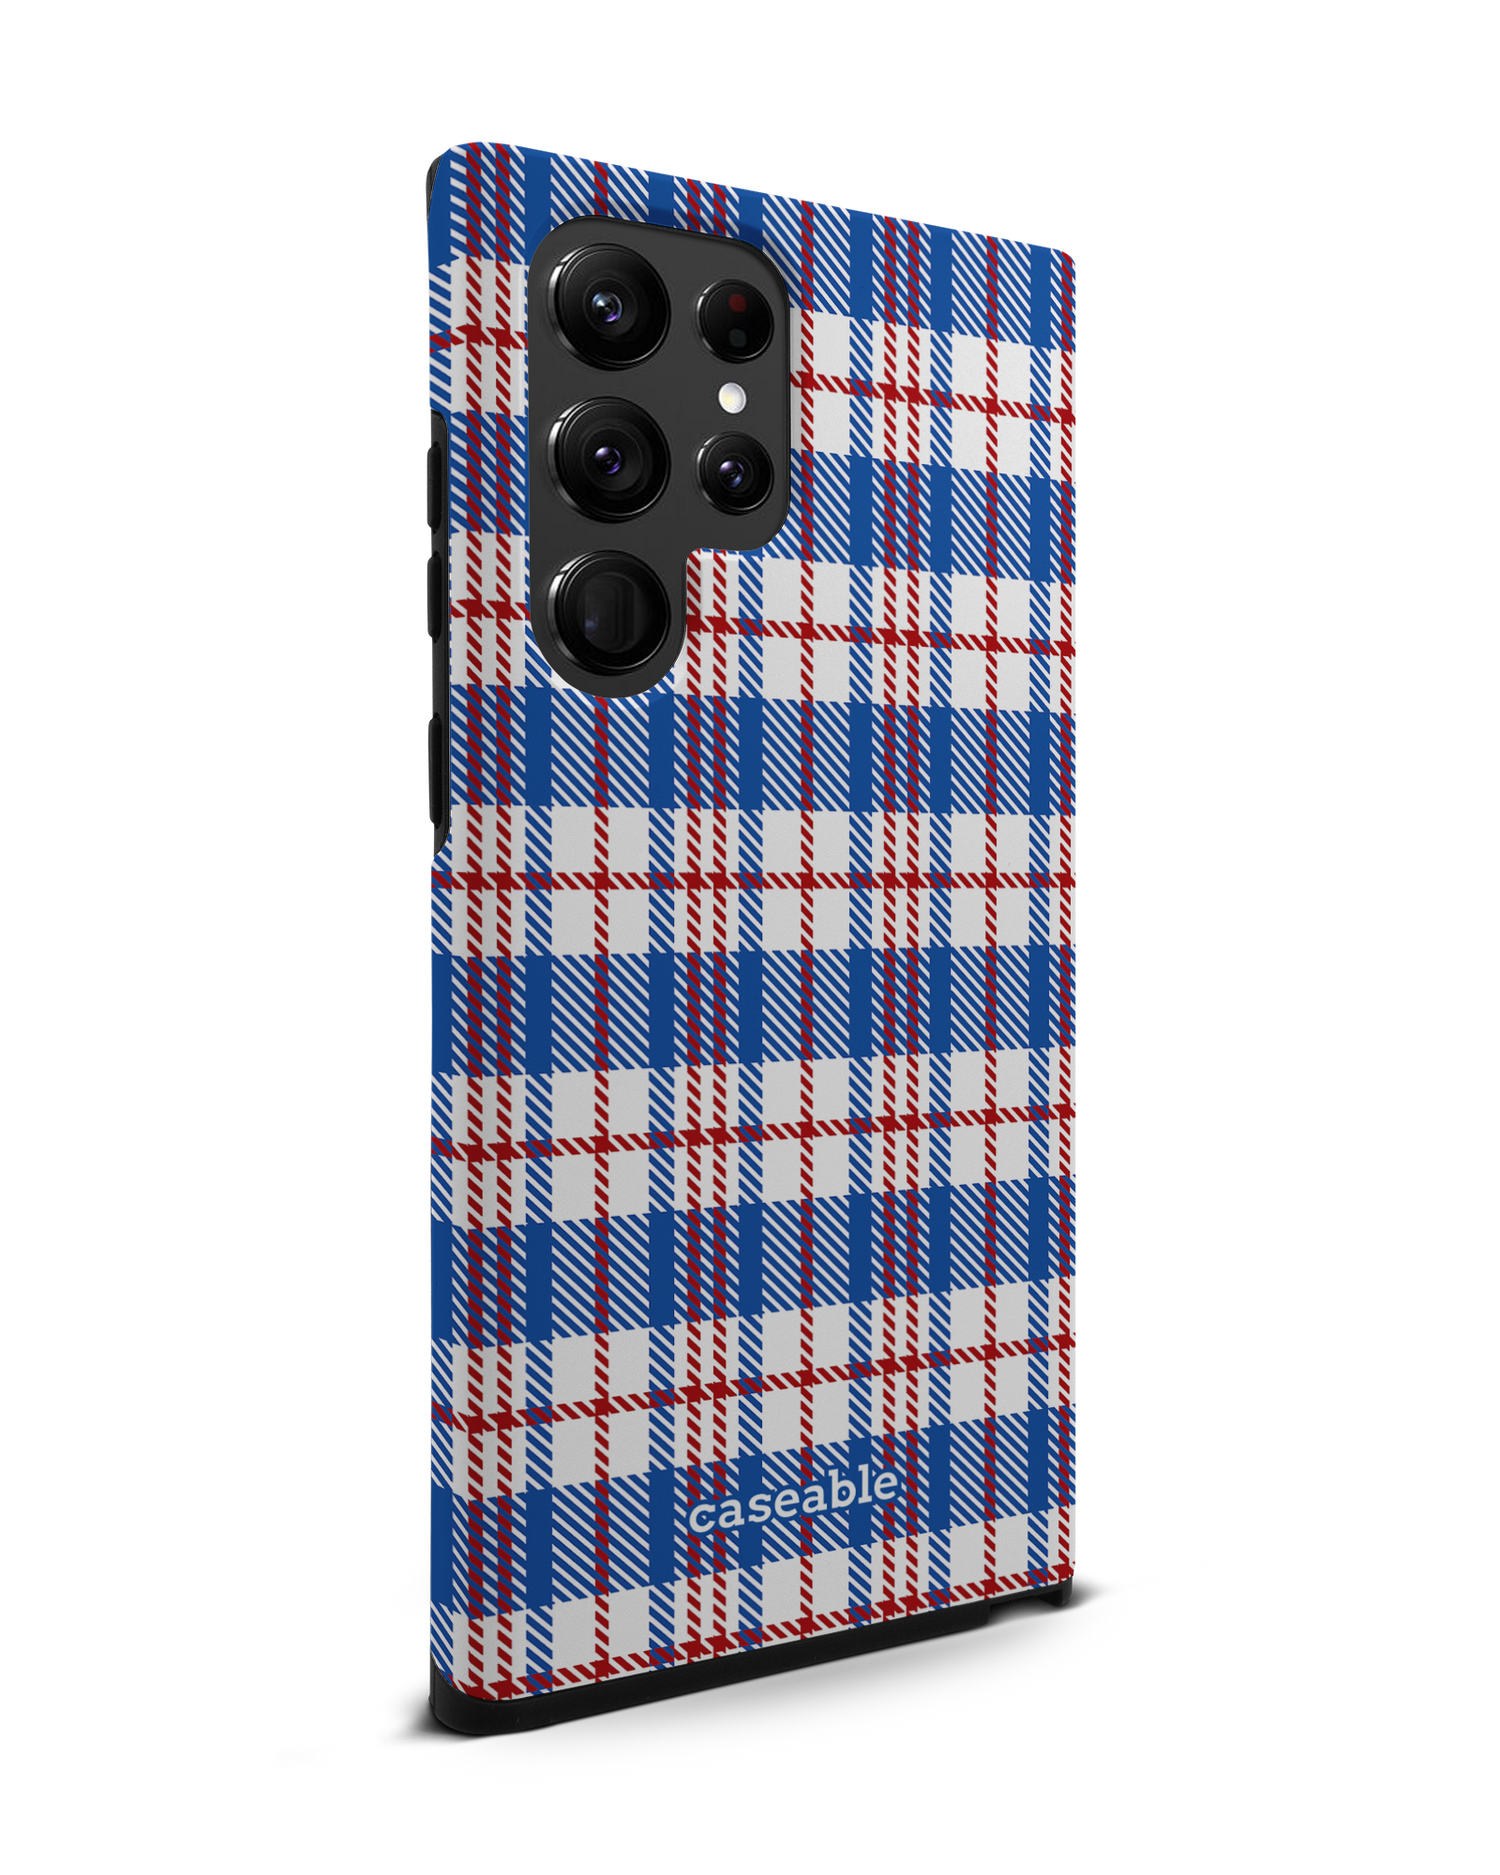 Plaid Market Bag Premium Phone Case Samsung Galaxy S22 Ultra 5G: View from the left side